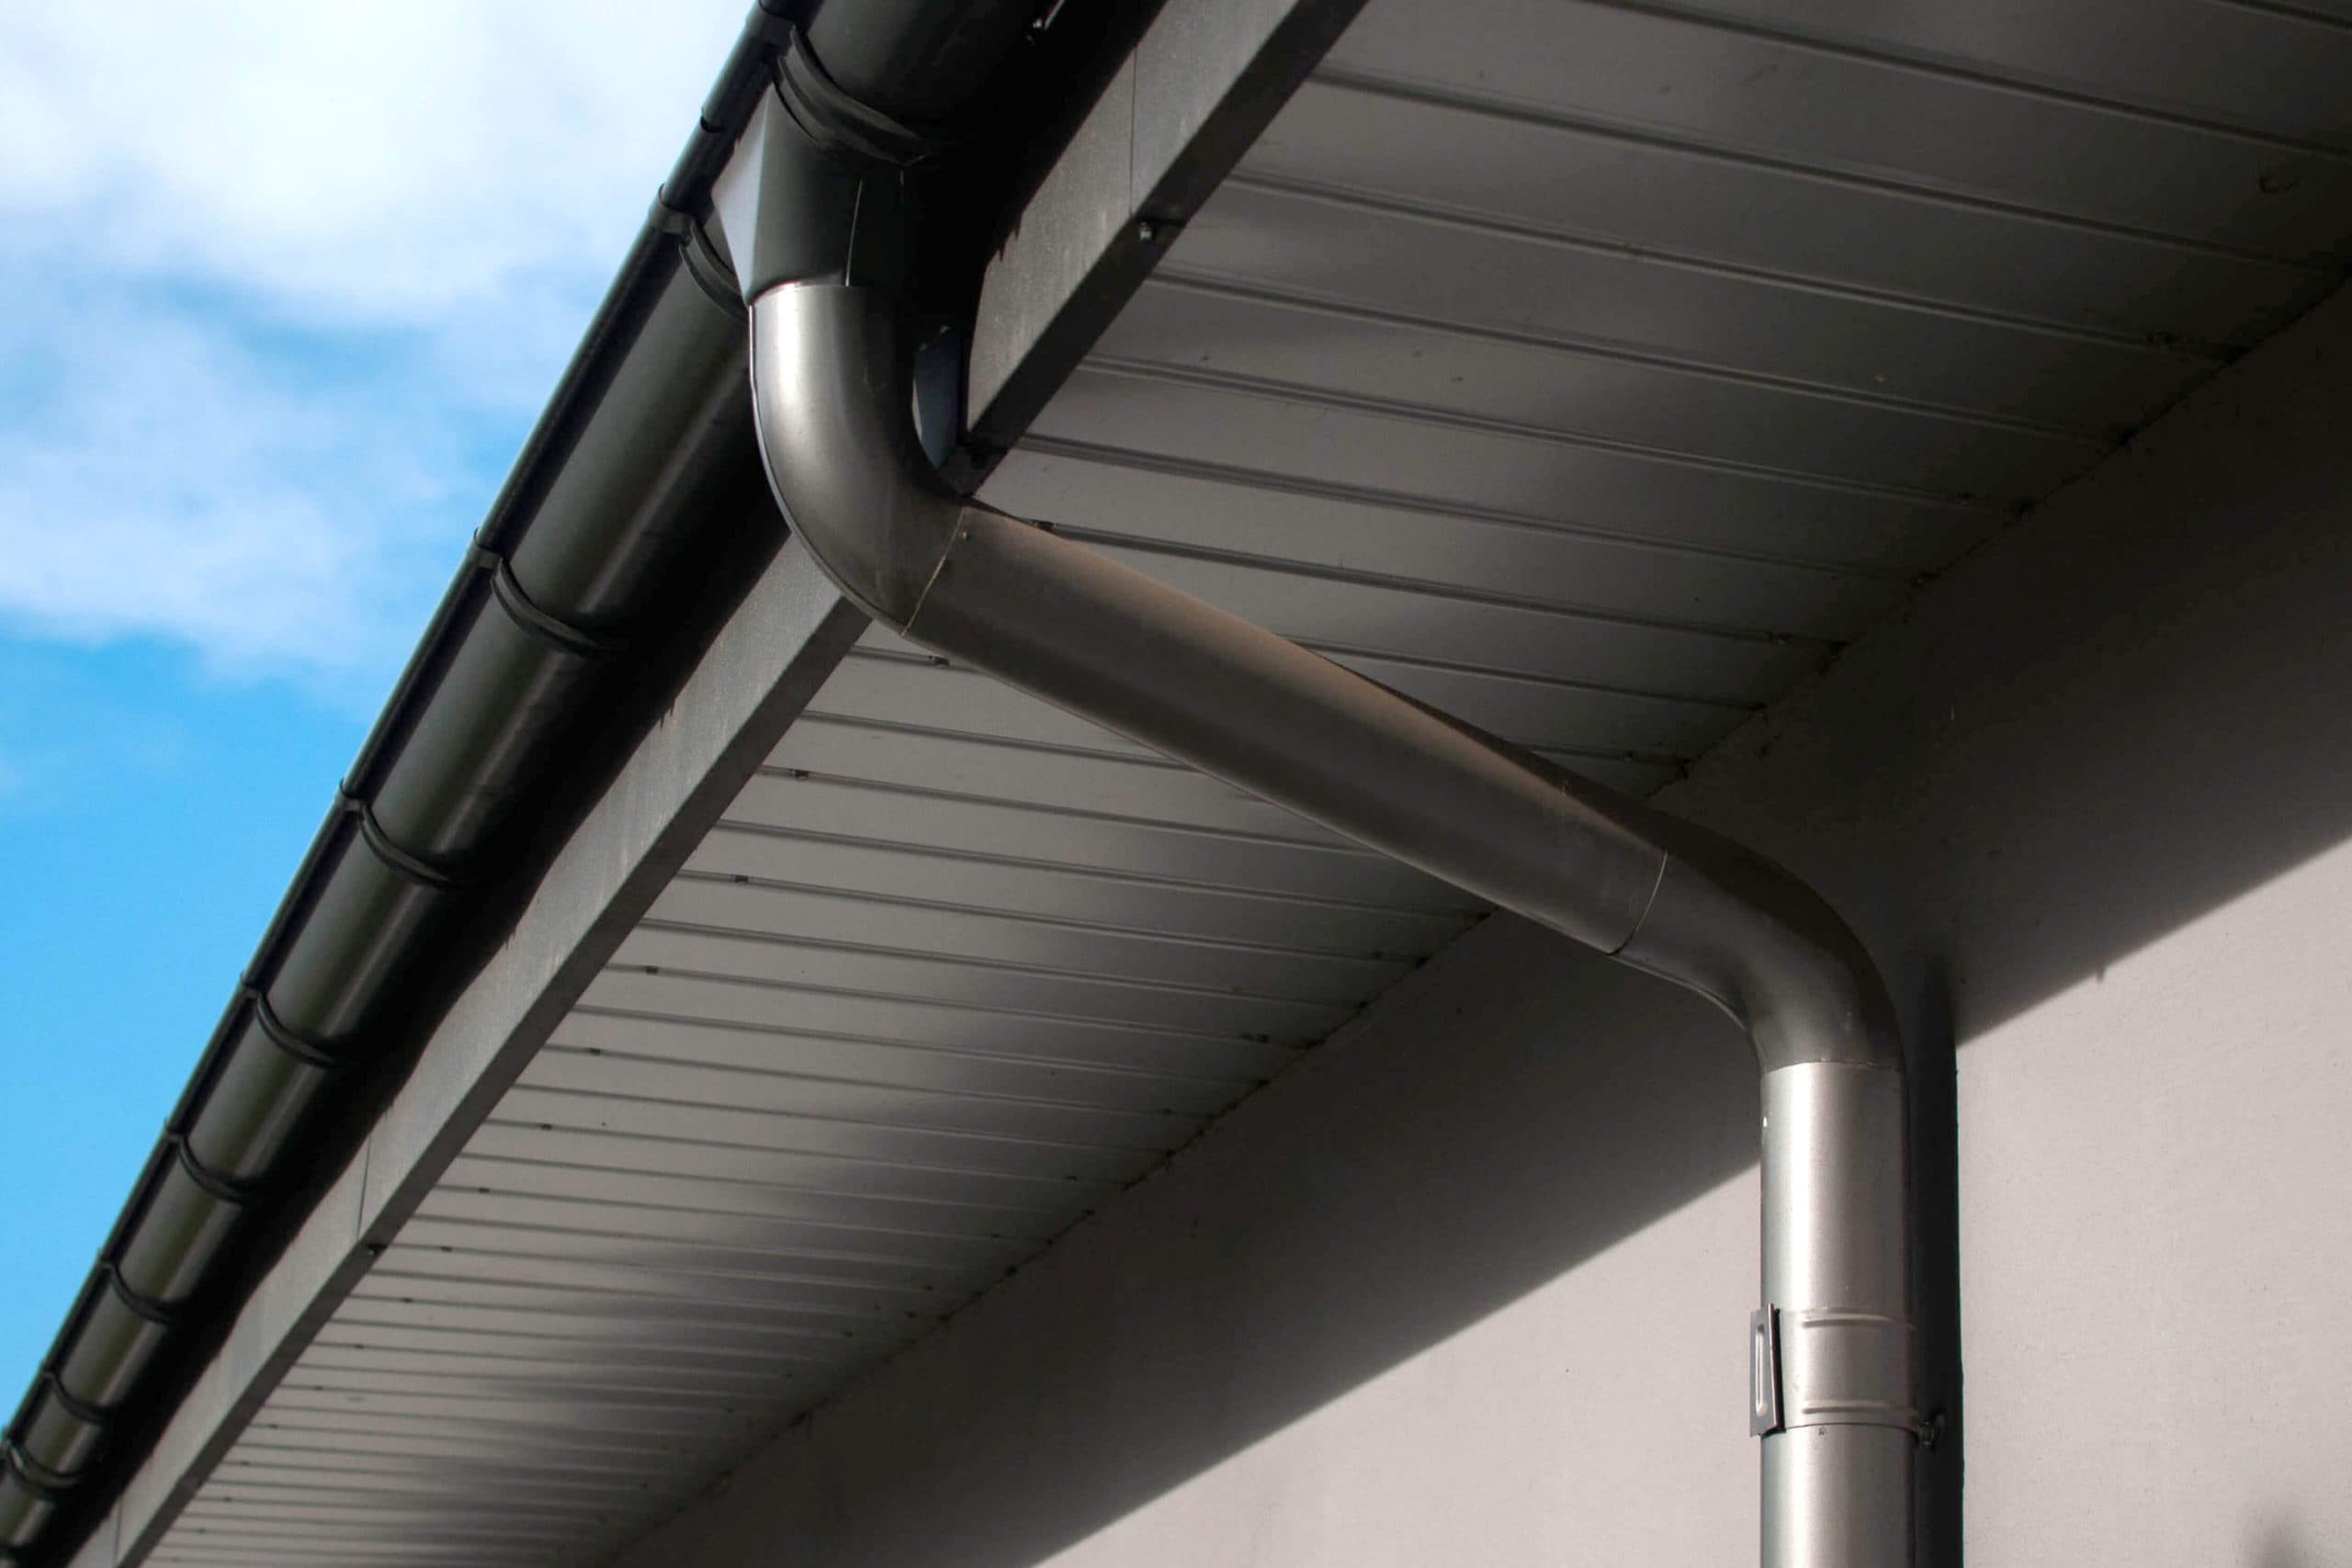 Reliable and affordable Galvanized gutters installation in Chesapeake